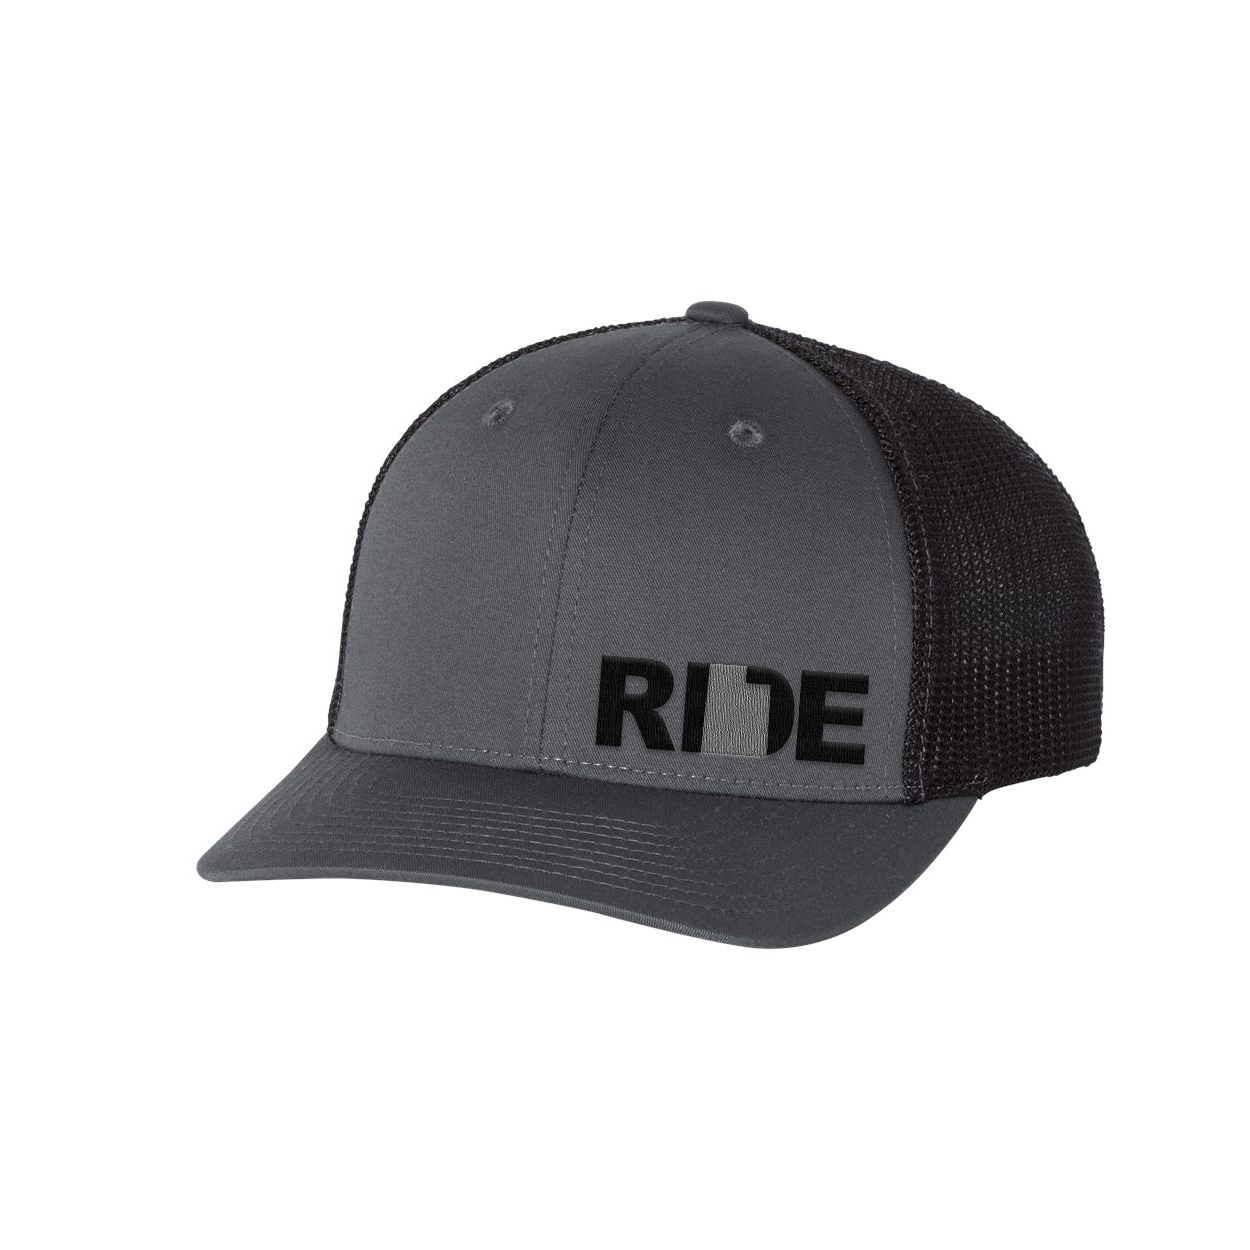 Ride Utah Night Out Pro Embroidered Snapback Trucker Hat Gray/Black